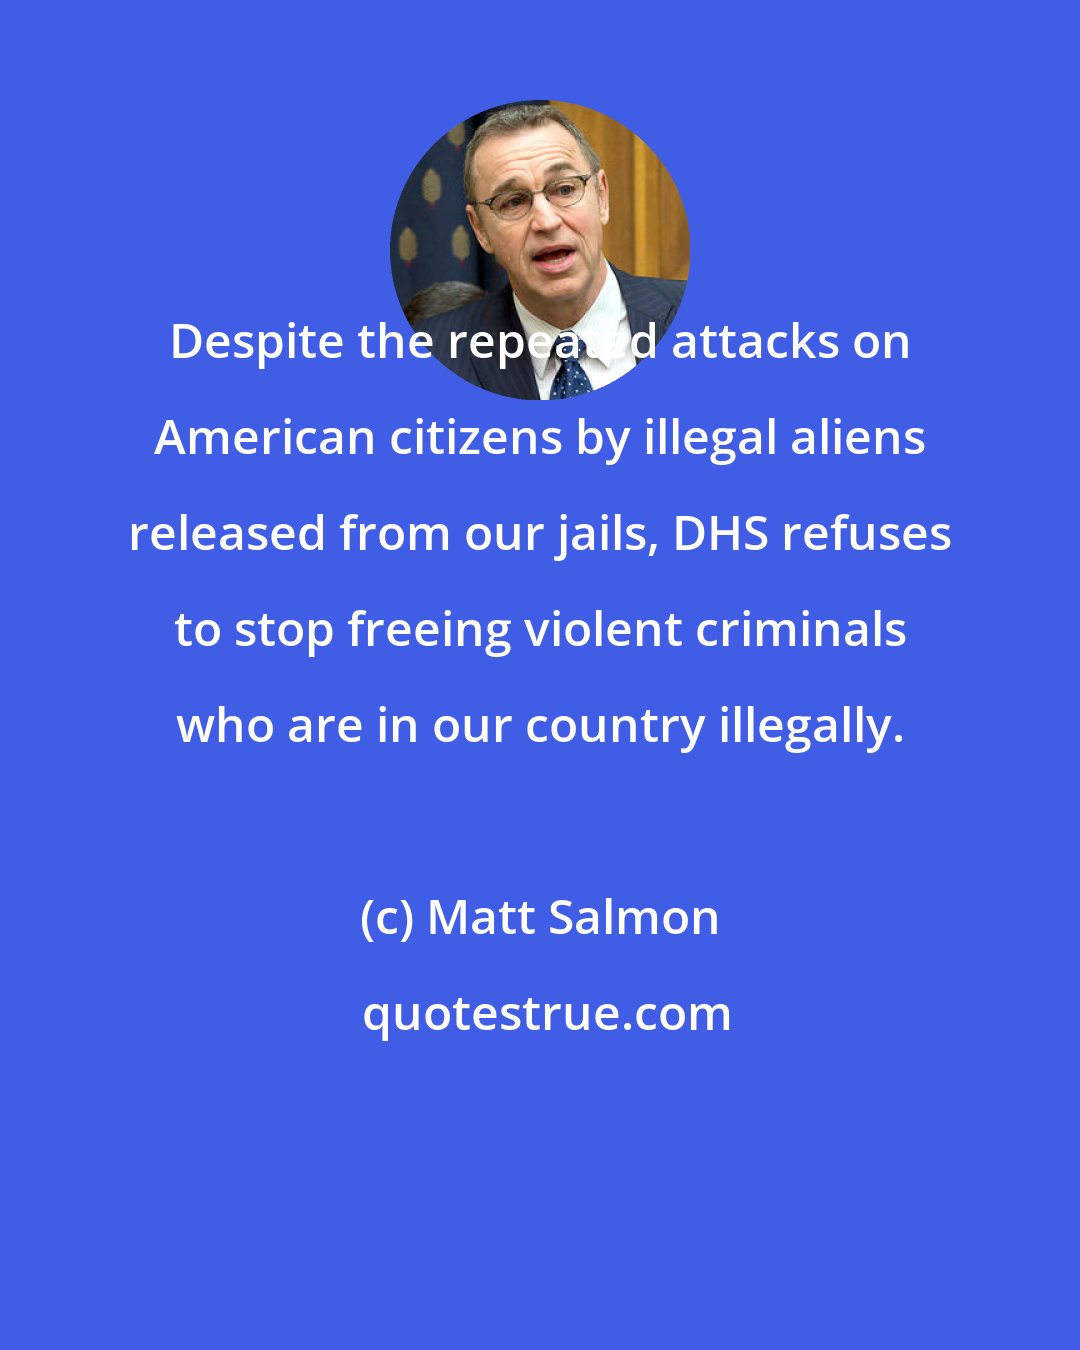 Matt Salmon: Despite the repeated attacks on American citizens by illegal aliens released from our jails, DHS refuses to stop freeing violent criminals who are in our country illegally.